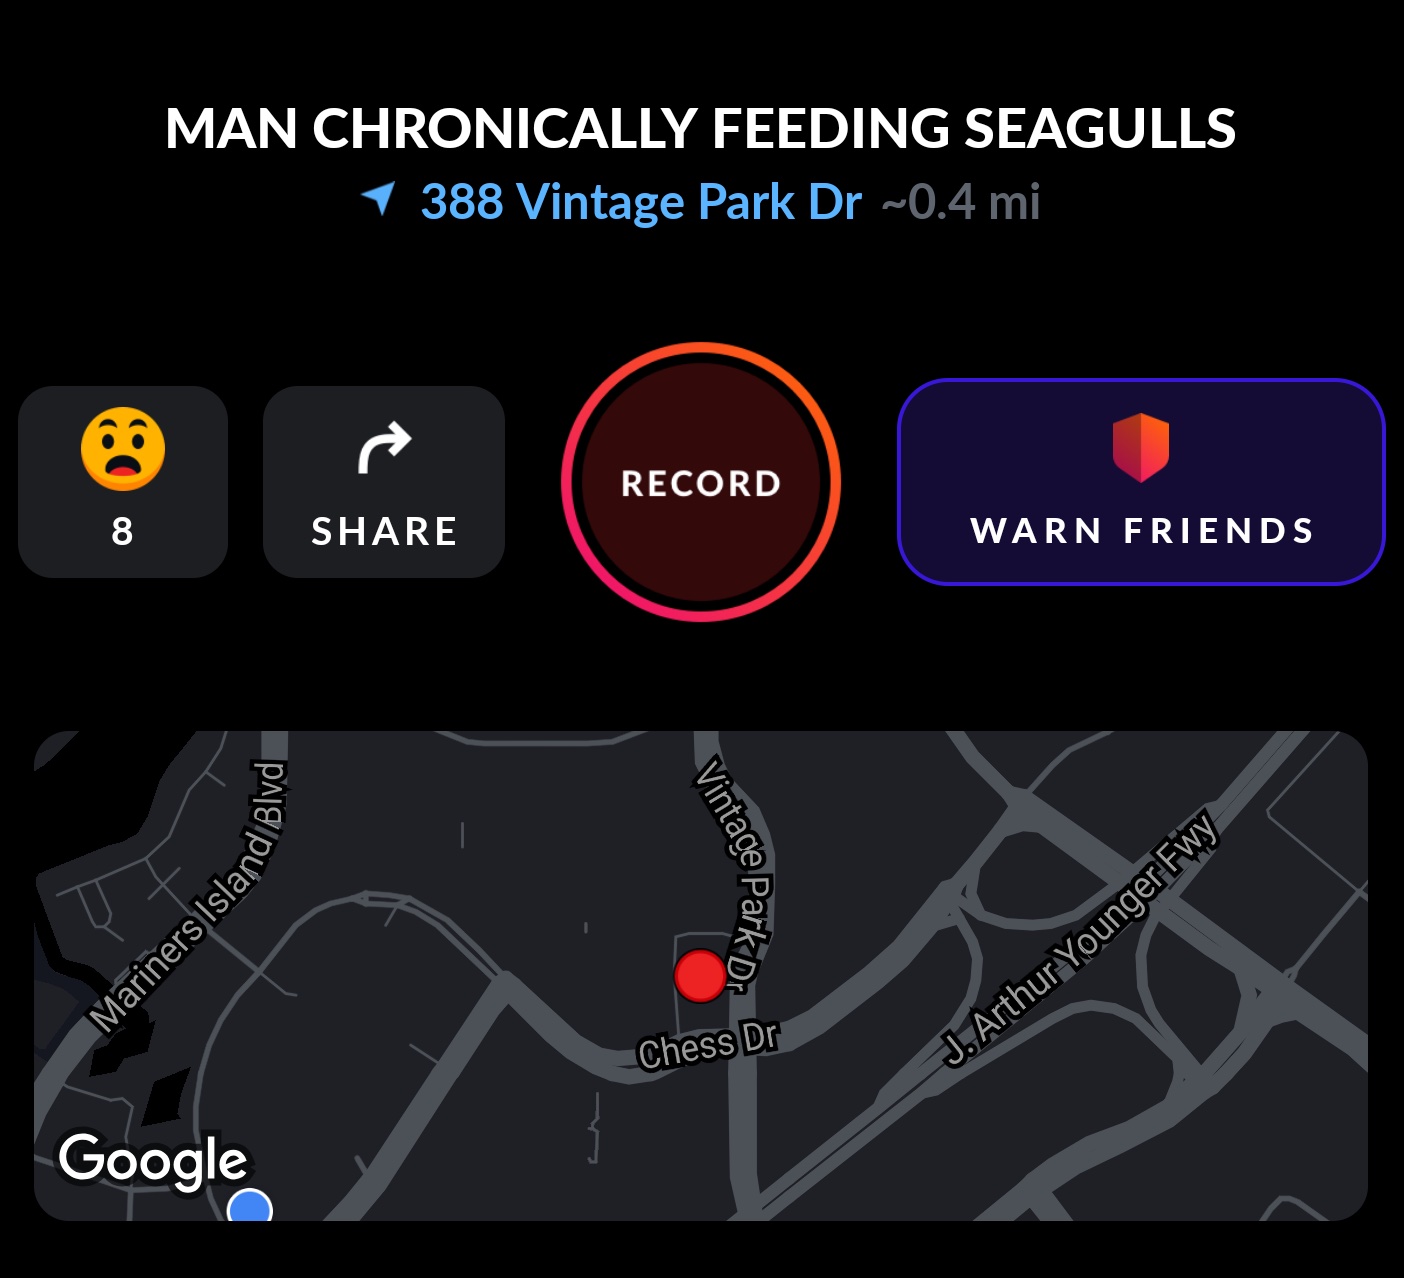 pte academic - Man Chronically Feeding Seagulls 1 388 Vintage Park Dr ~0.4 mi Record 8 Warn Friends Mariners Island Vintage Park Dr Chess Dr J. Arthur Younger Fwy Google